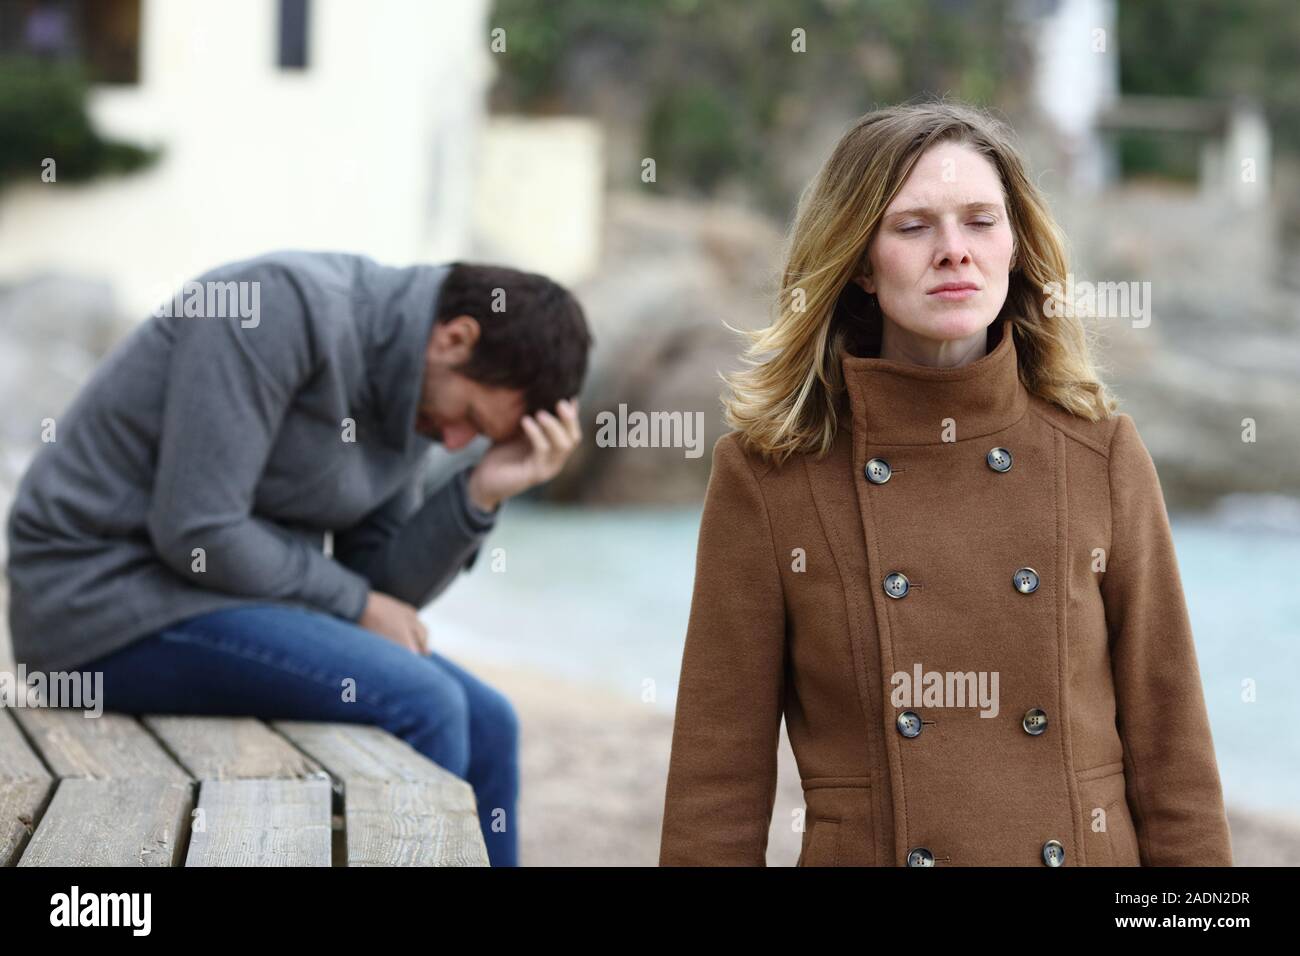 Sad boyfriend complaining after break up and angry girlfriend leaving him in winter Stock Photo